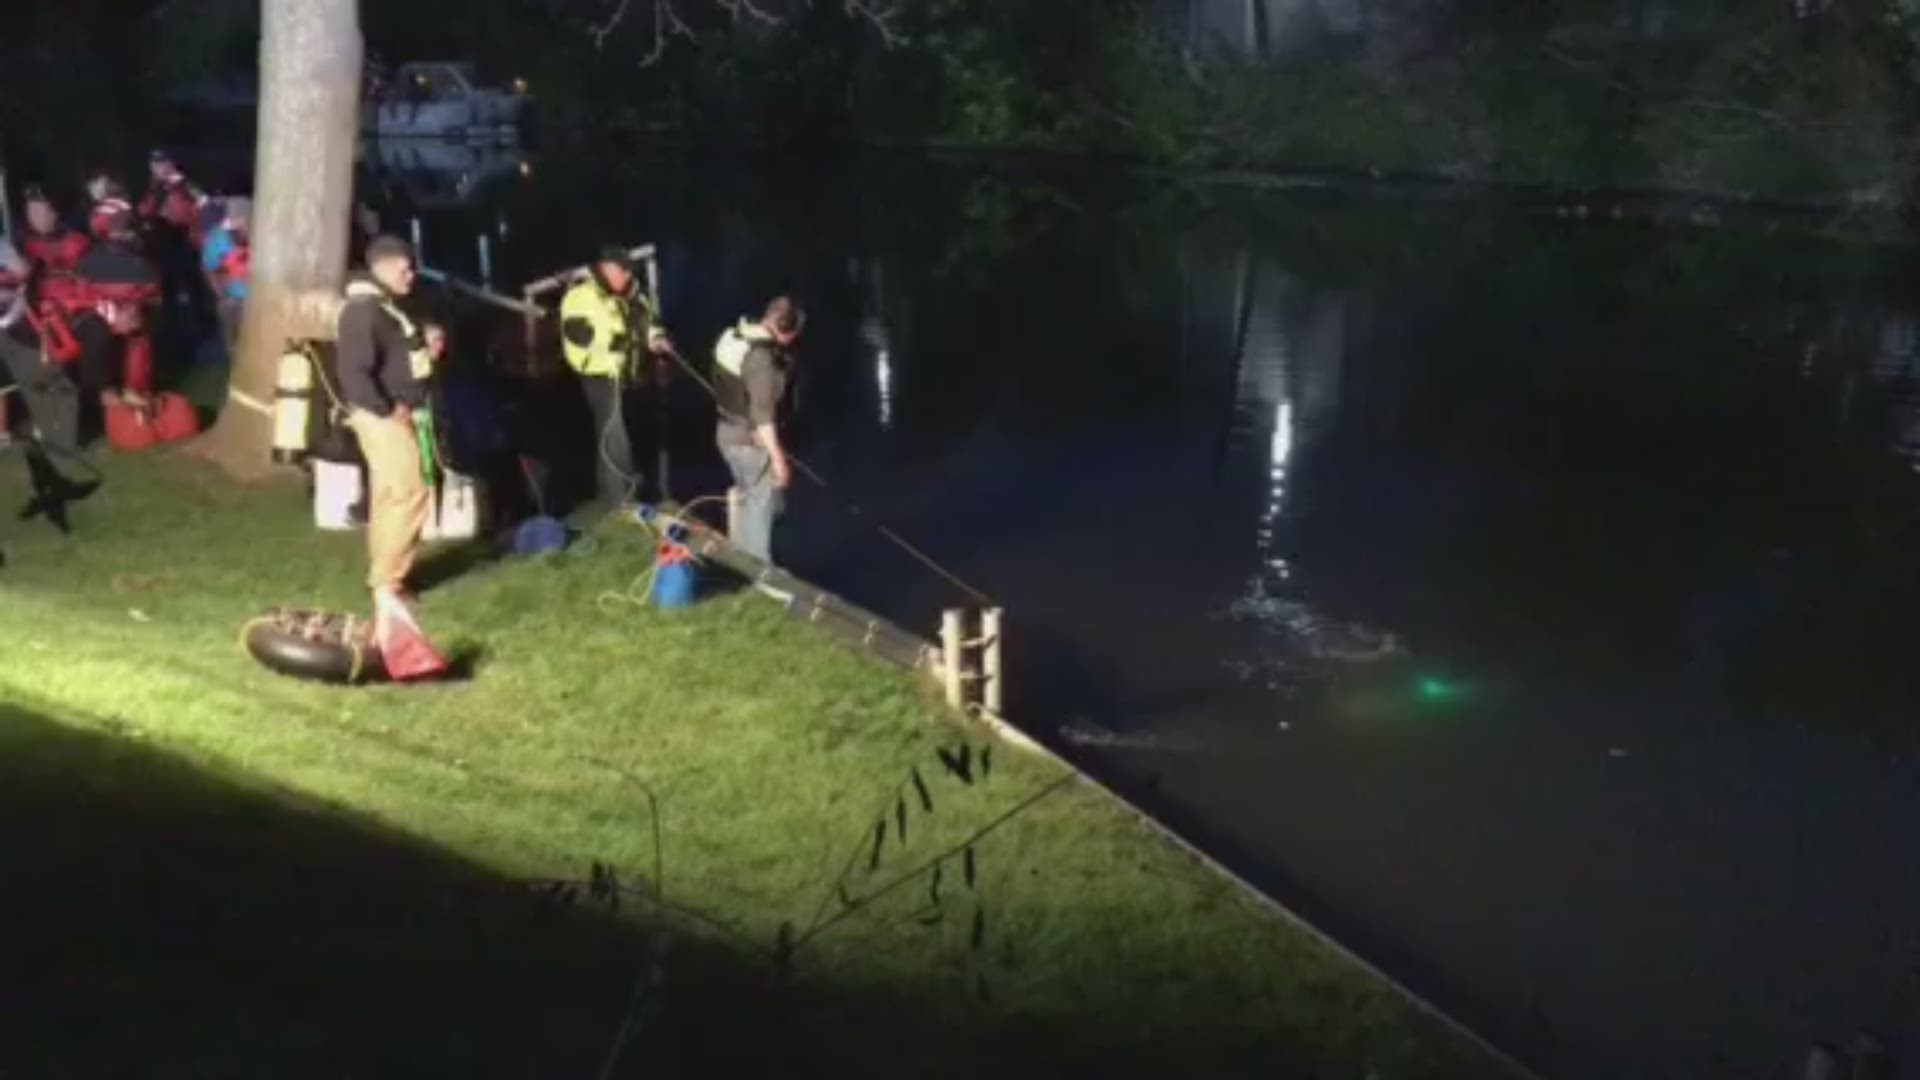 Police are investigating after a car goes into Ellicott Creek in City of Tonawanda.